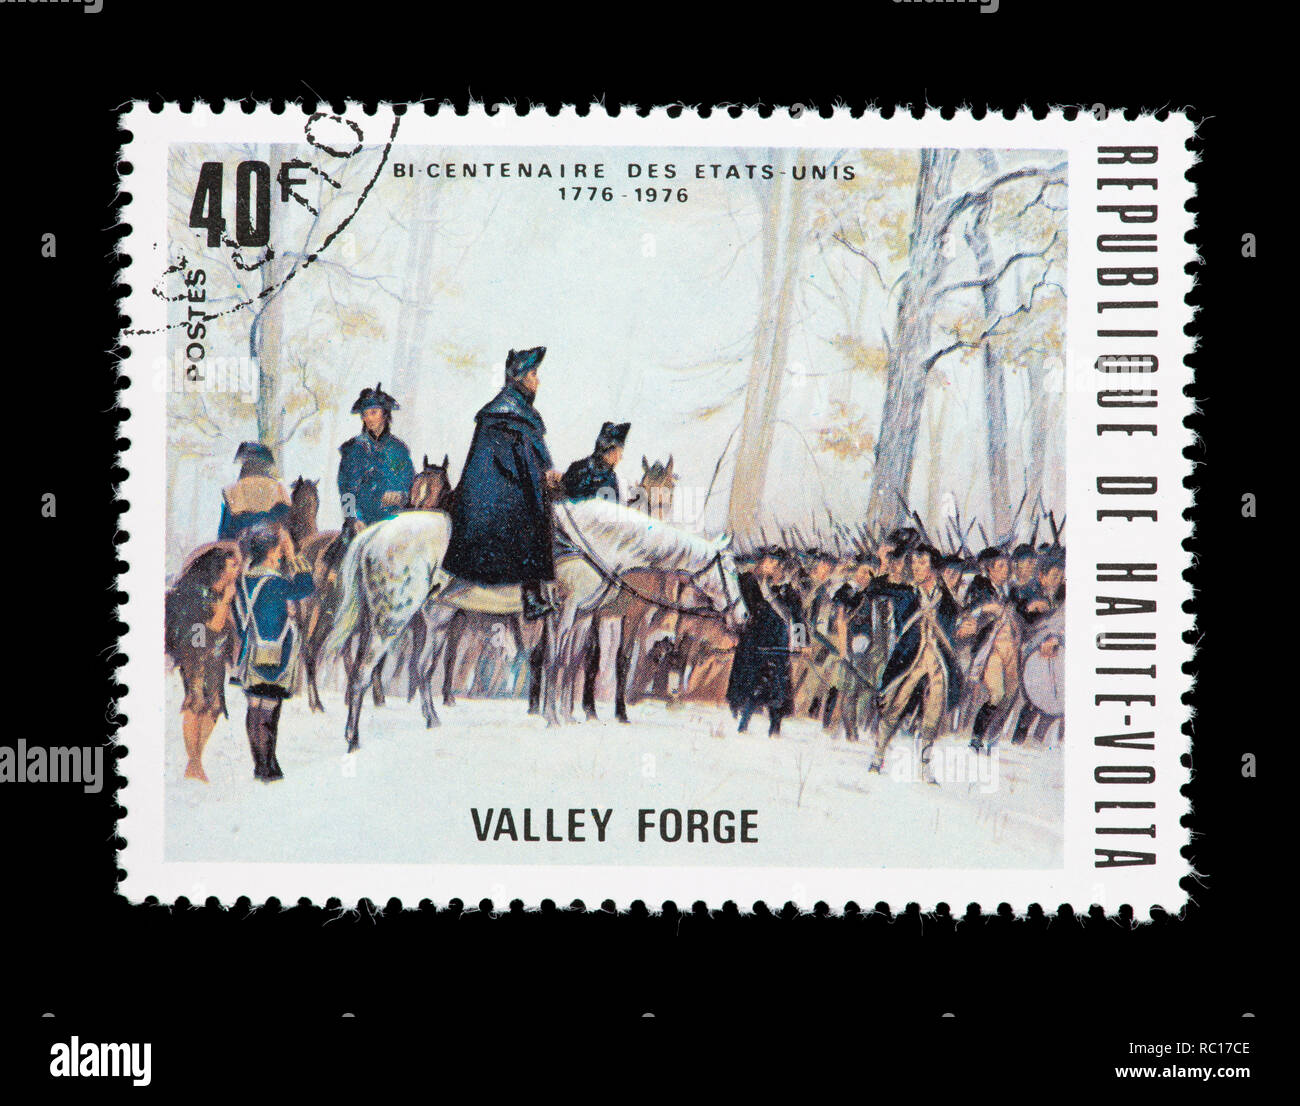 Postage stamp from Upper Volta (Burkina Faso) depicting Washington reviewing troops at Valley Forge, United States bicentennial. Stock Photo